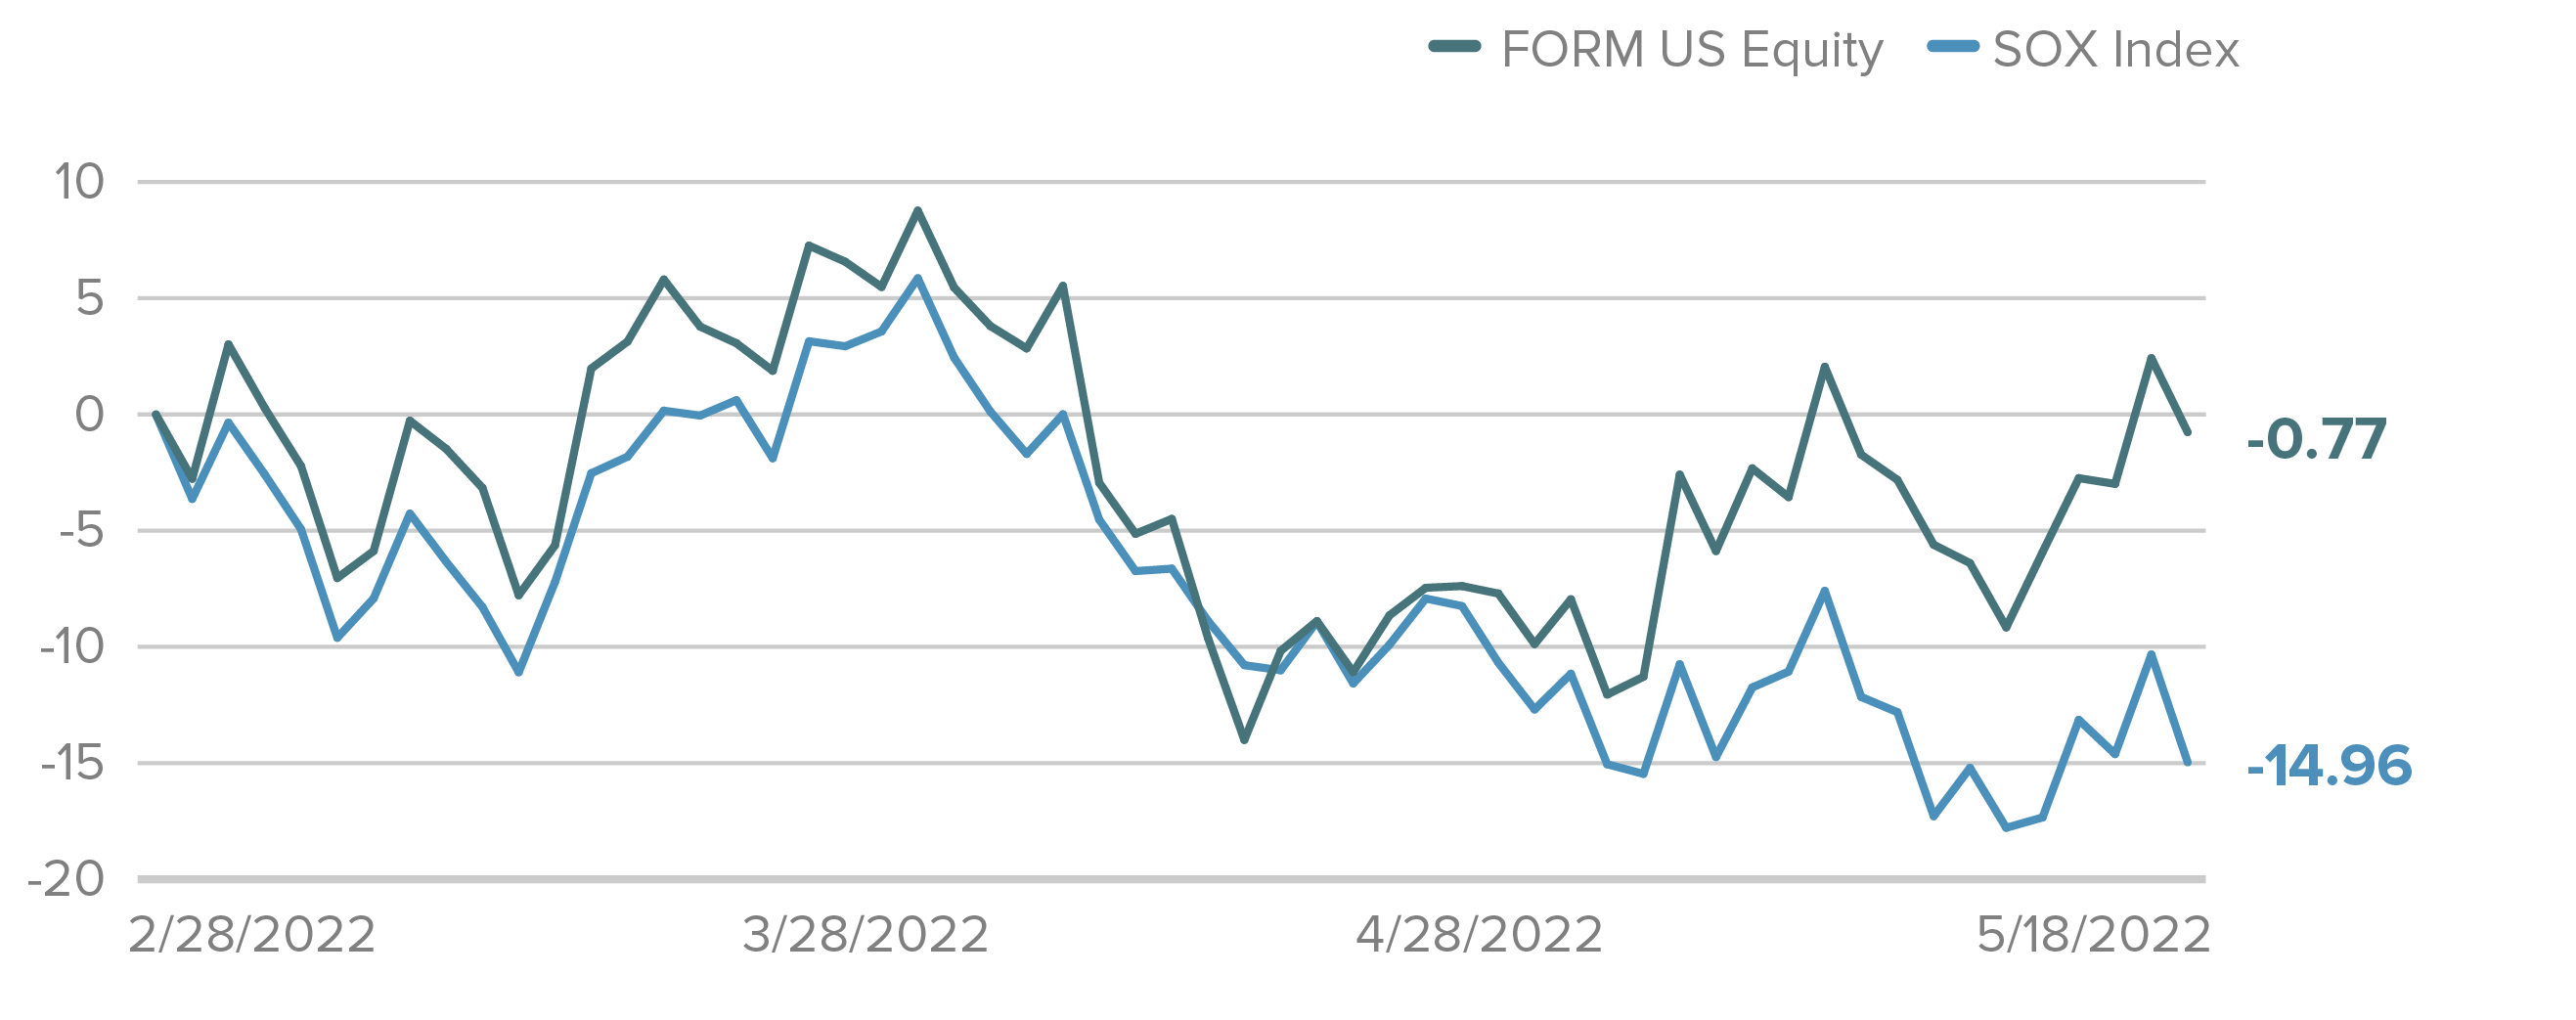 -0.77 for FORM US Equity and -14.96 for SOX Index at 5/18/22